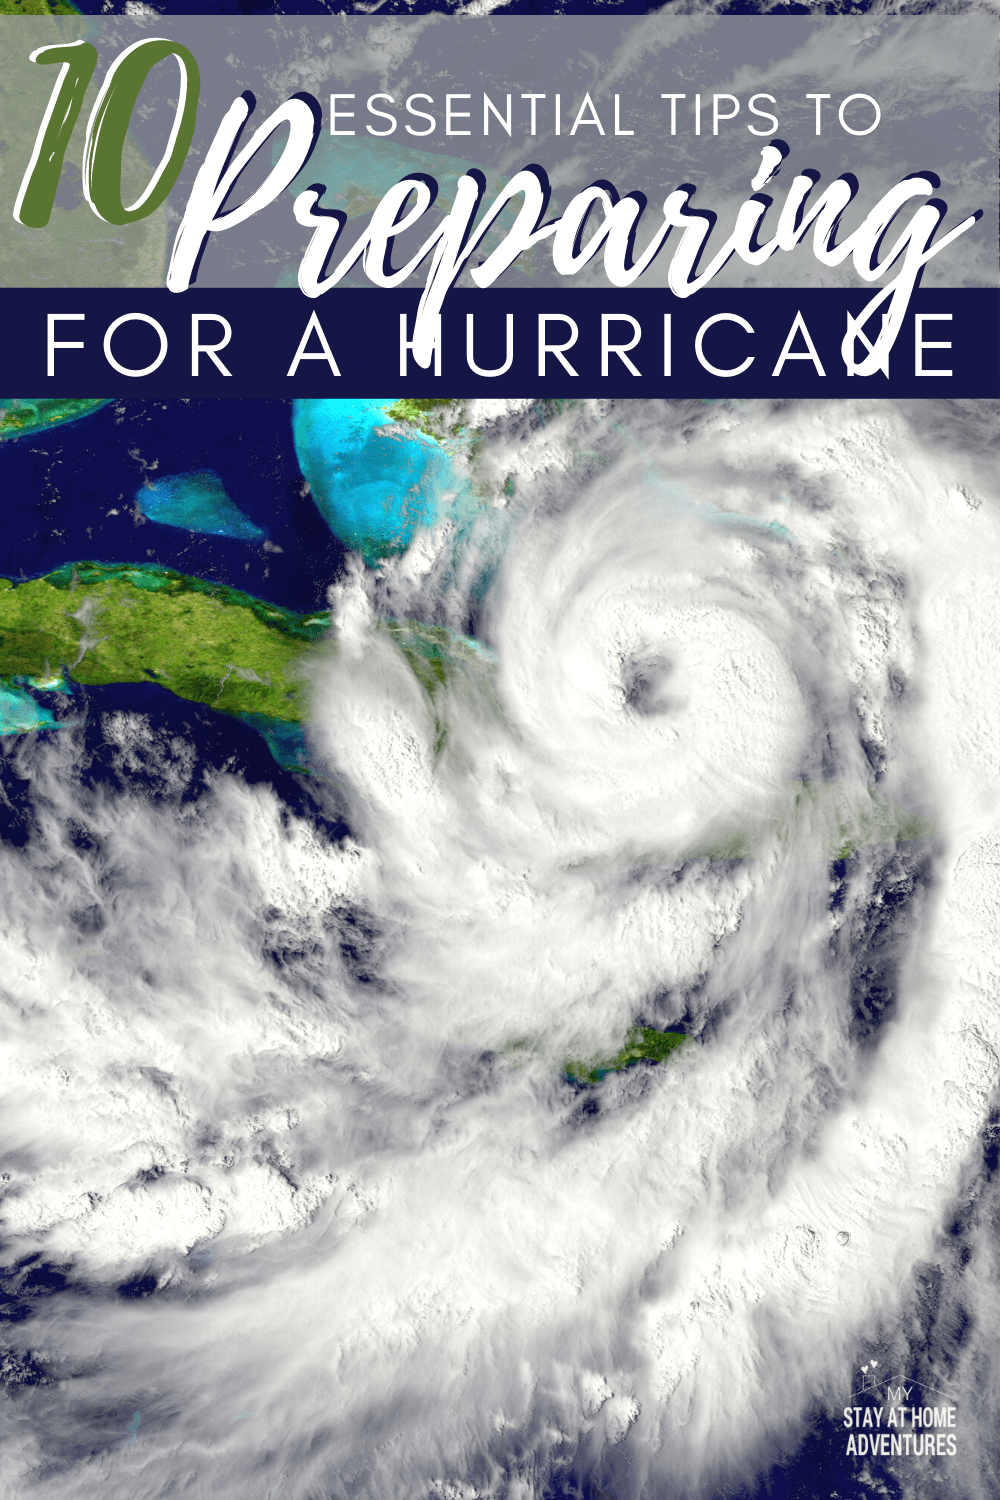 Start early and learn how to prepare for a hurricane on a budget. With these tips to building a budget-friendly preparedness kit, you won't break the bank. via @mystayathome